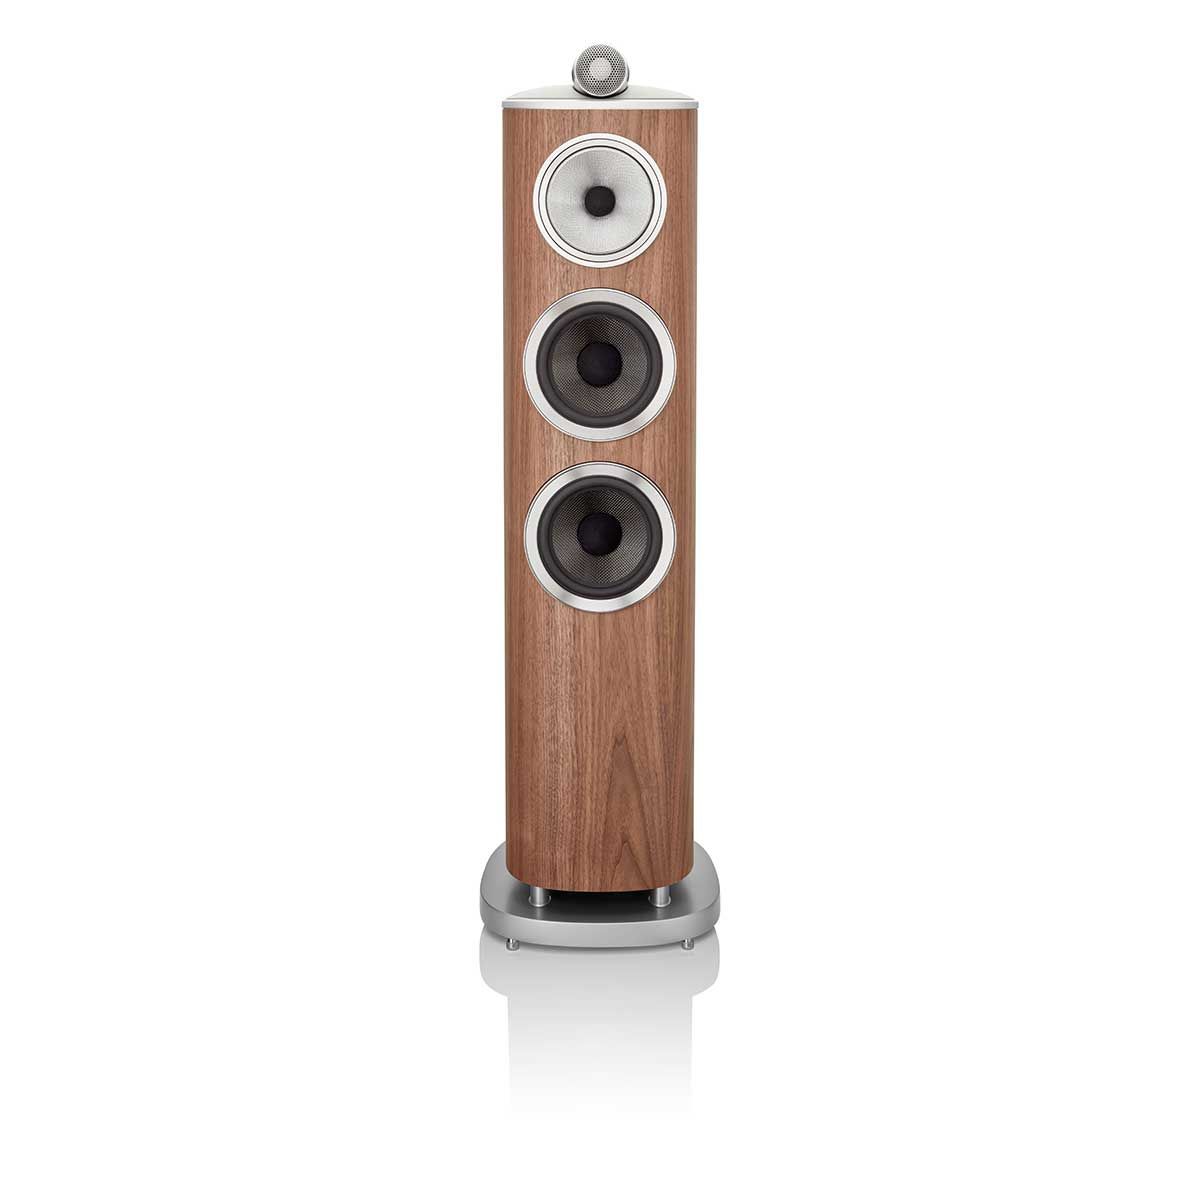 Bowers & Wilkins 804 D4 Floorstanding Speaker, Satin Walnut, front view without grille